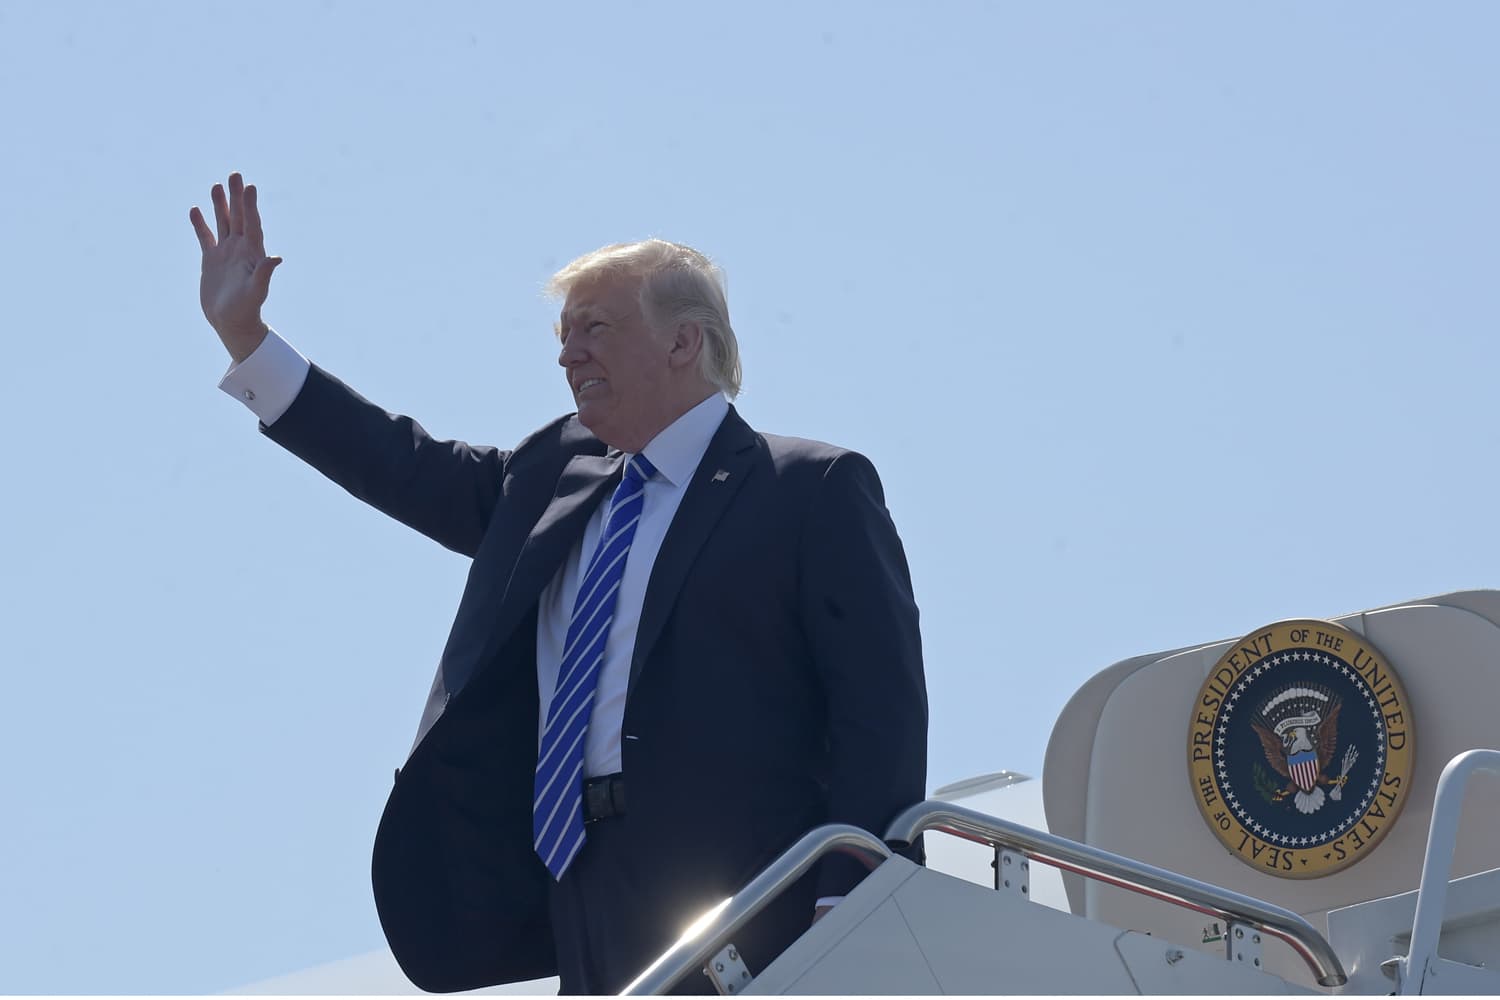 President Donald Trump waves as he walks off Air Force One at Groton-New London Airport in Groton, Conn., Wednesday, May 17, 2017. (AP Photo/Susan Walsh)